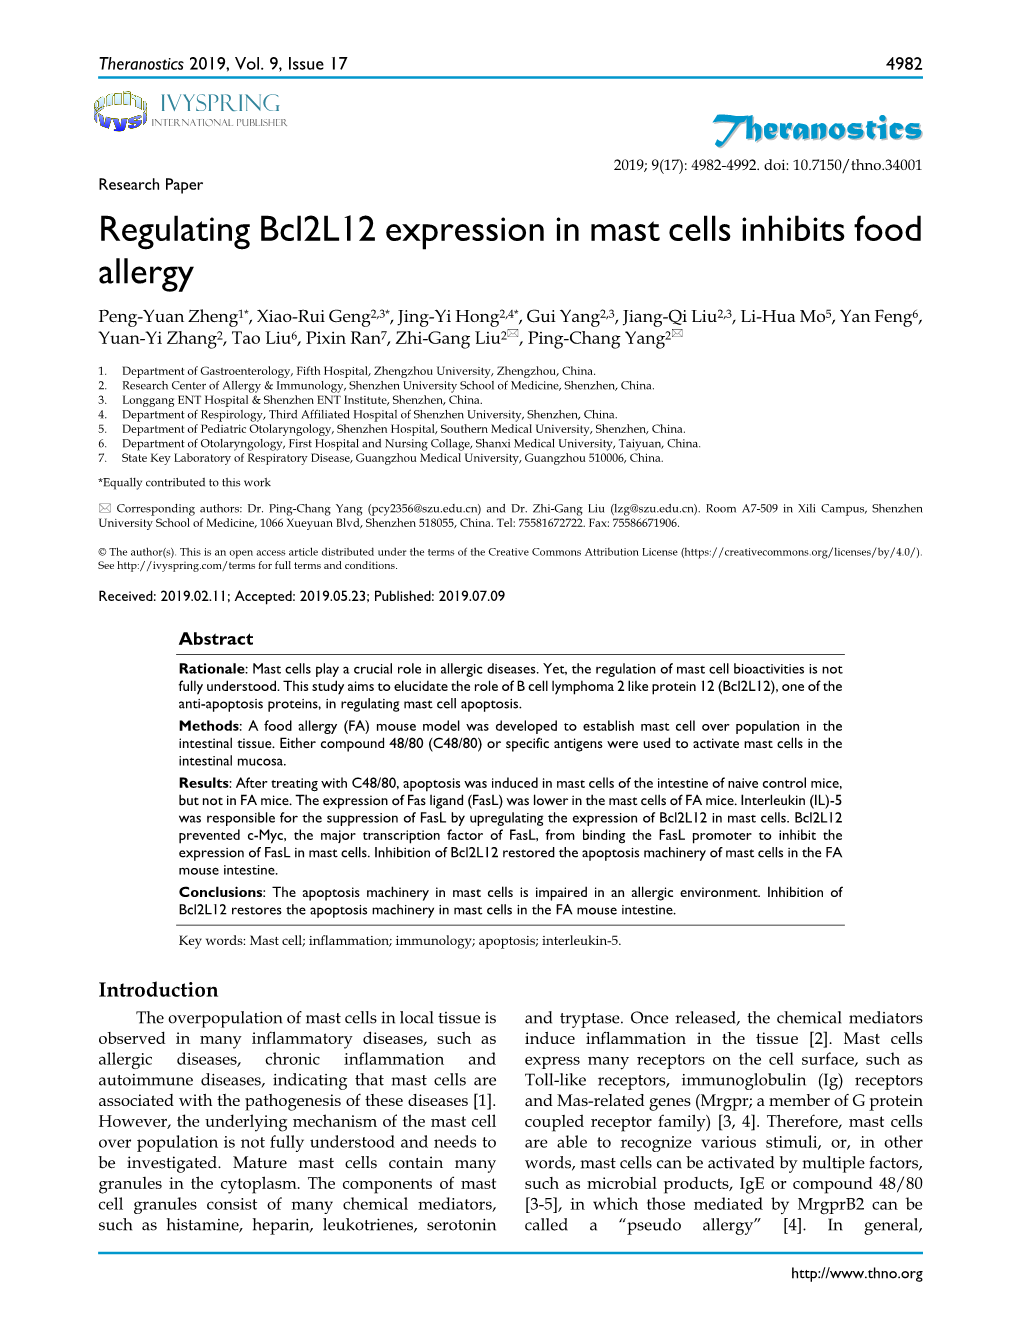 Regulating Bcl2l12 Expression in Mast Cells Inhibits Food Allergy